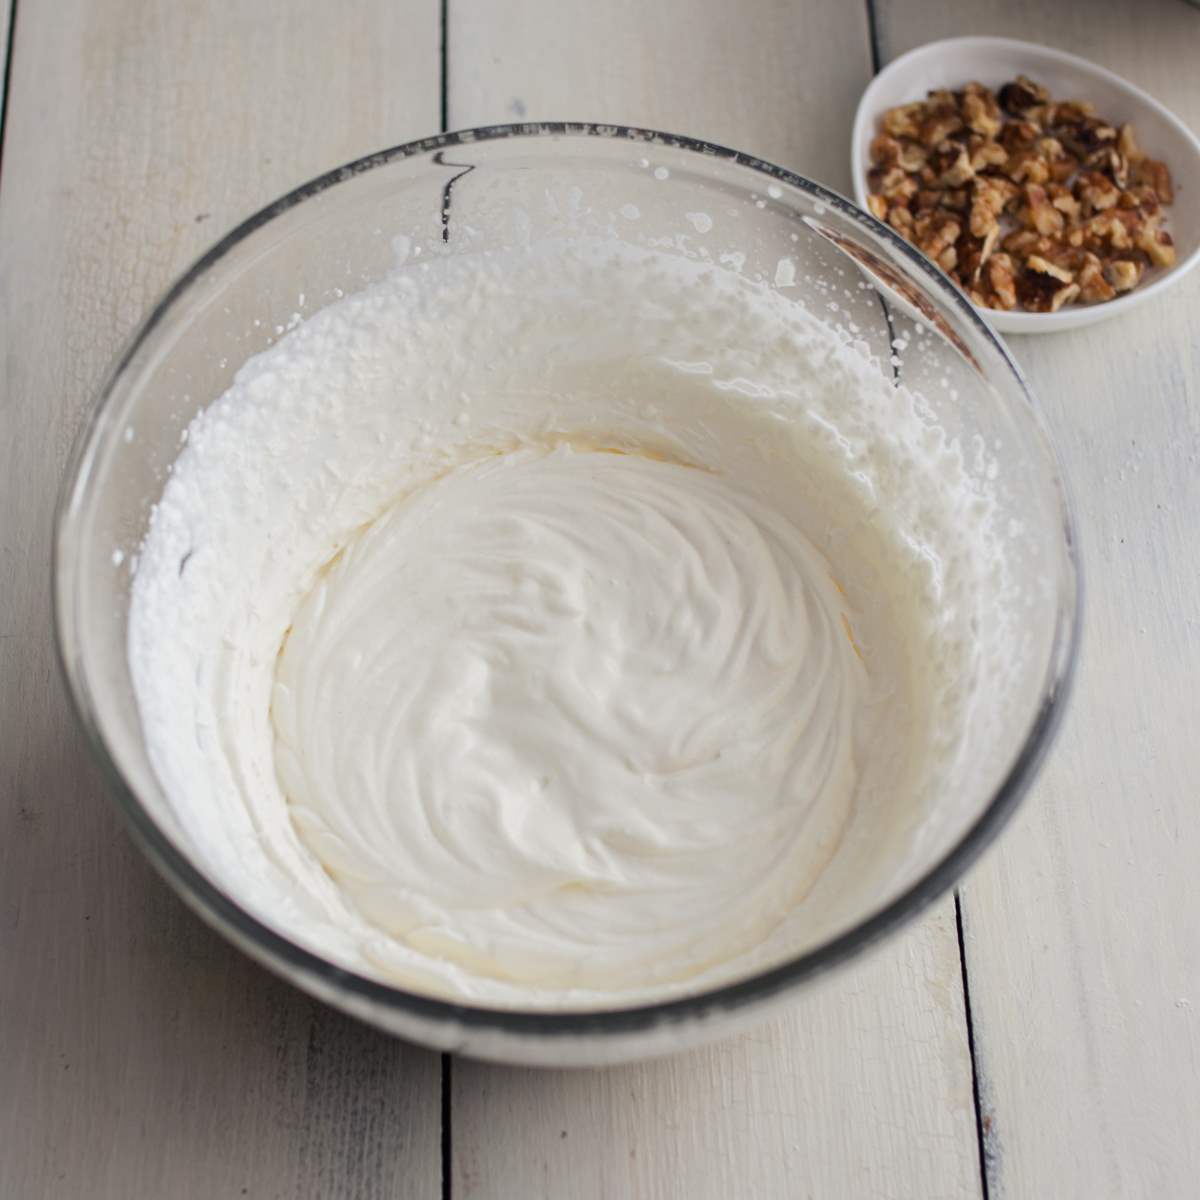 Whipped cream in a clear mixing bowl on a wooden board.